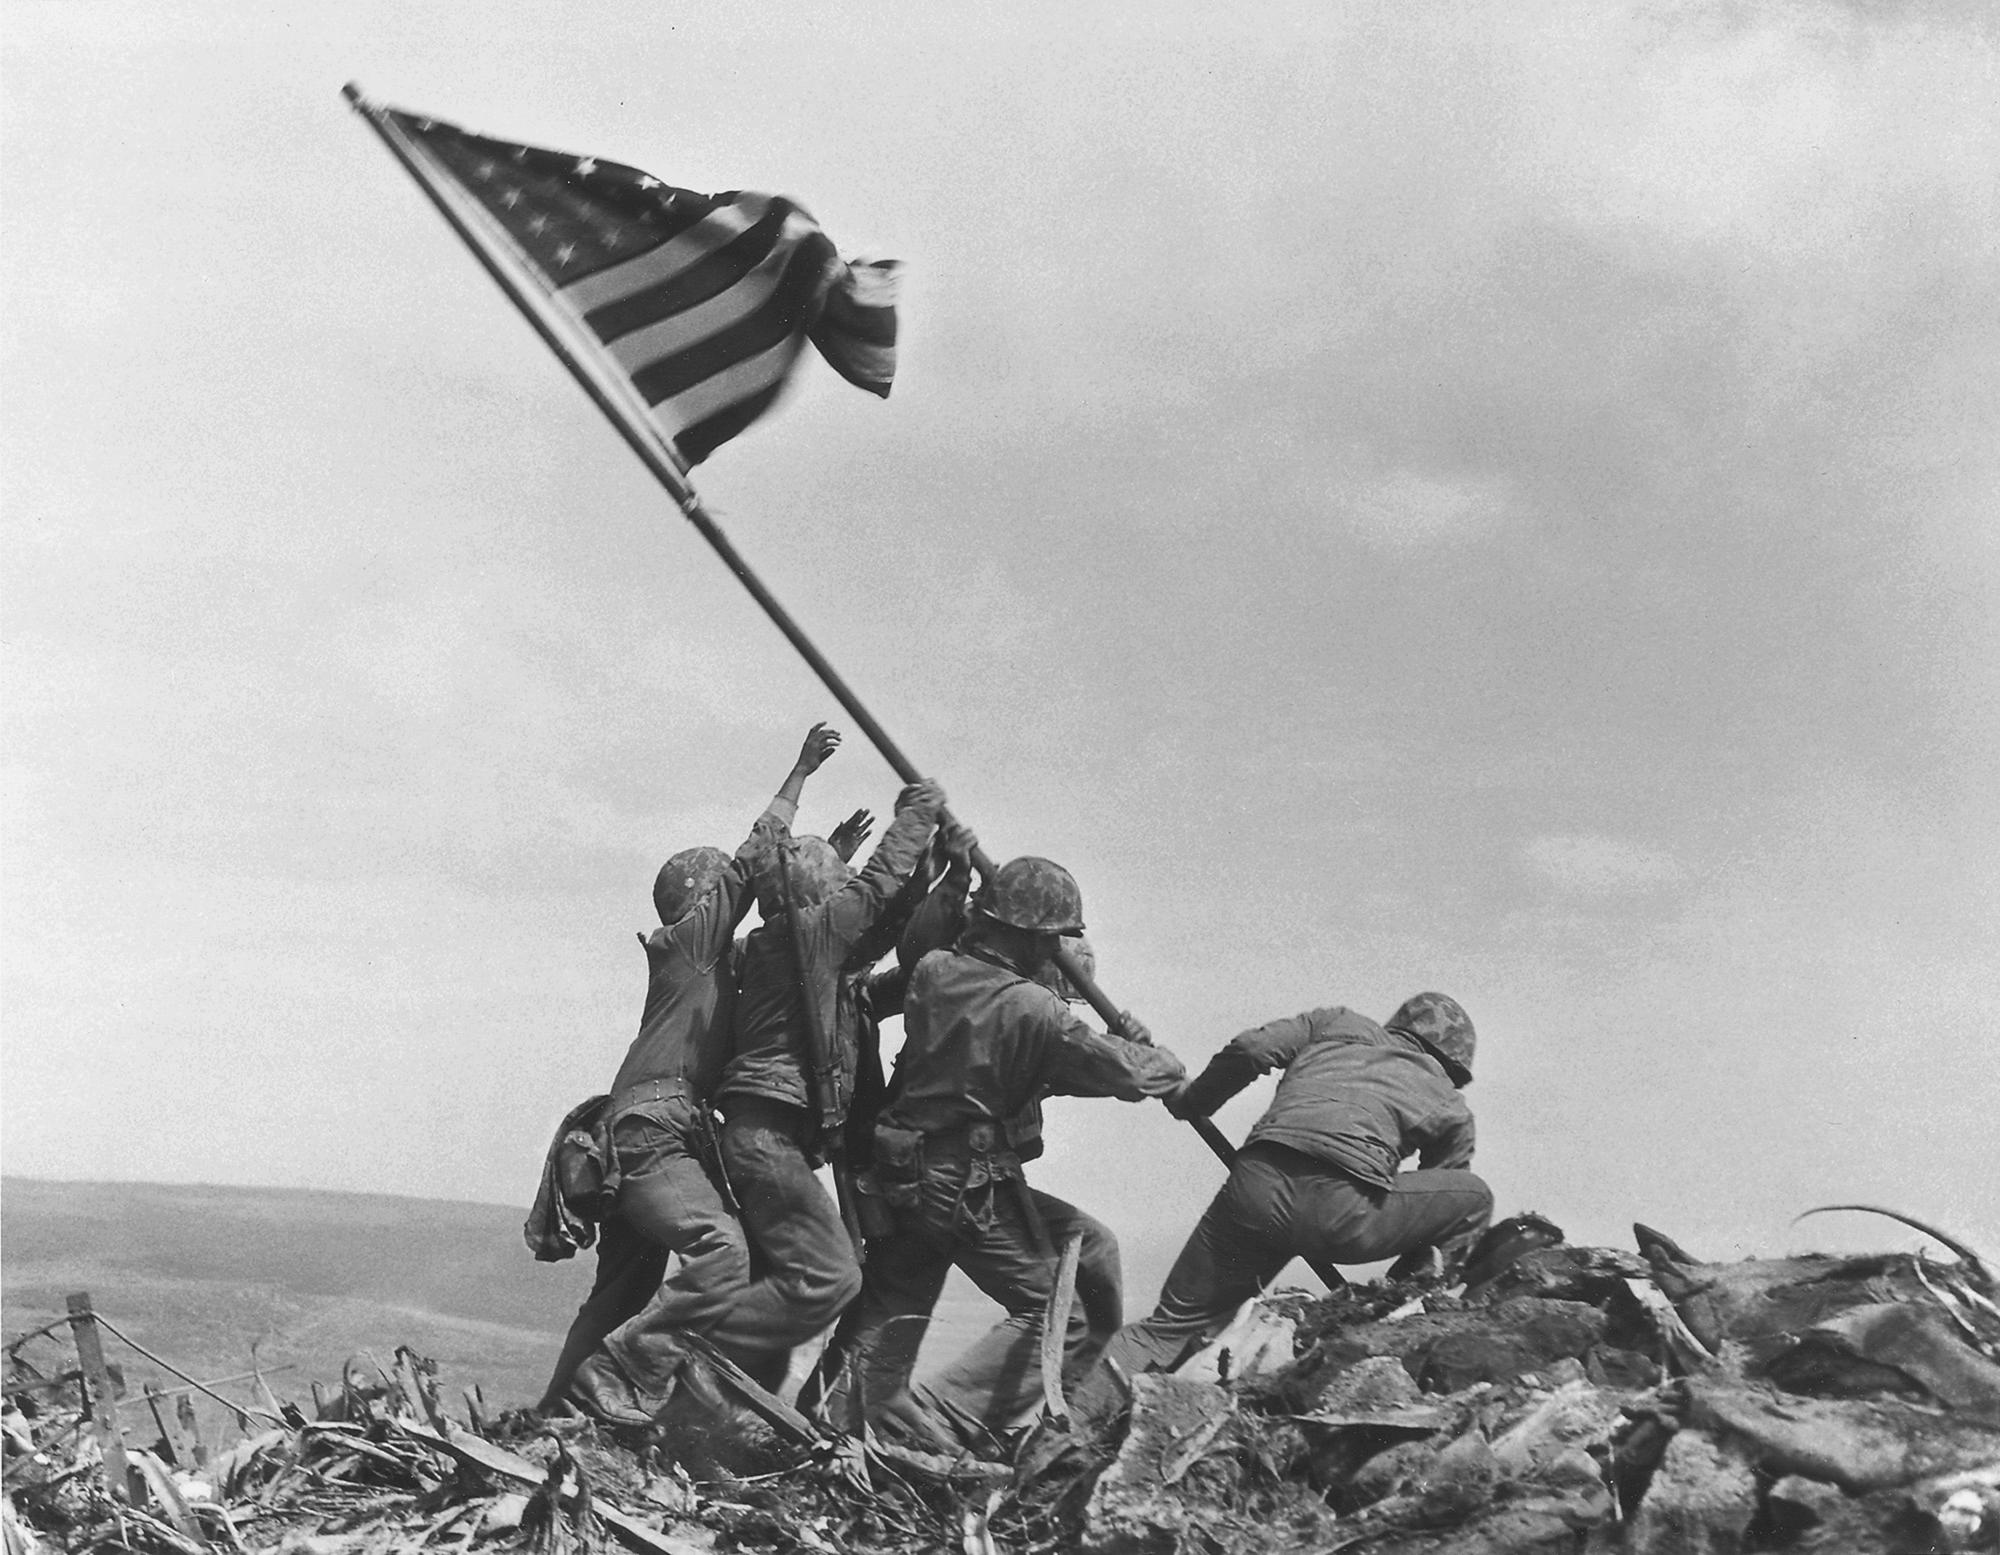 FILE - U.S. Marines of the 28th Regiment, 5th Division, raise the U.S. flag on Mt. Suribachi, Iwo Jima, Feb. 23, 1945. Strategically located only 660 miles from Tokyo, the Pacific island became the site of one of the bloodiest, most famous battles of World War II against Japan. (AP Photo/Joe Rosenthal, File)